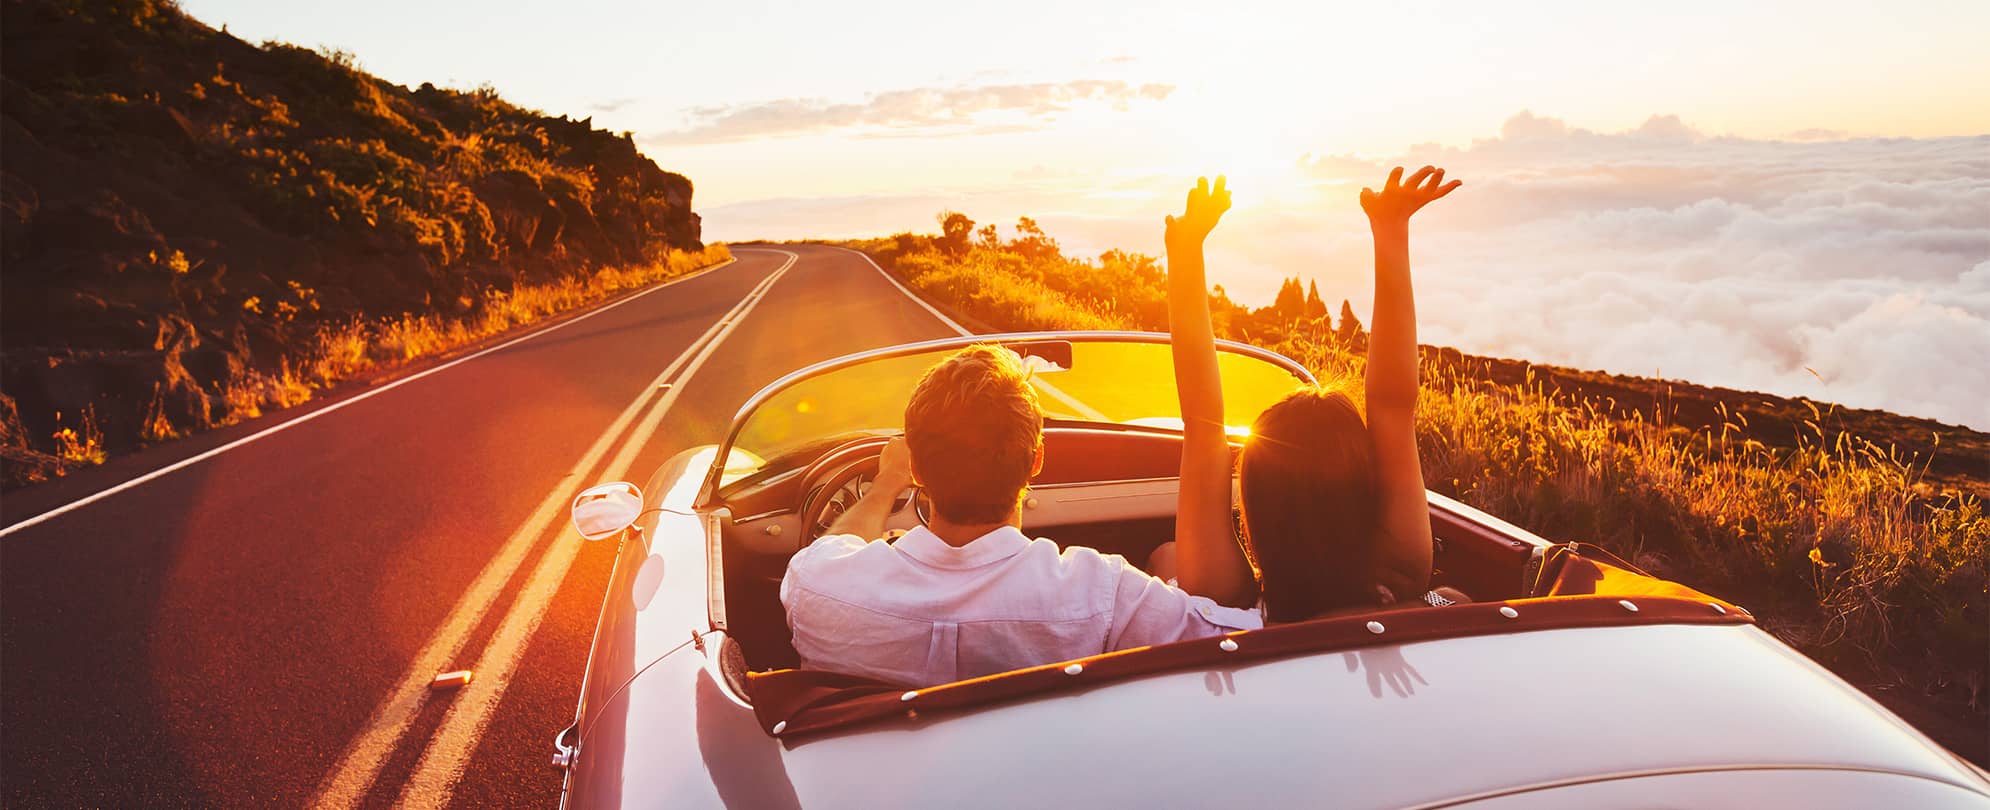 A man and a woman cheerfully drive off into the sunset in a convertible